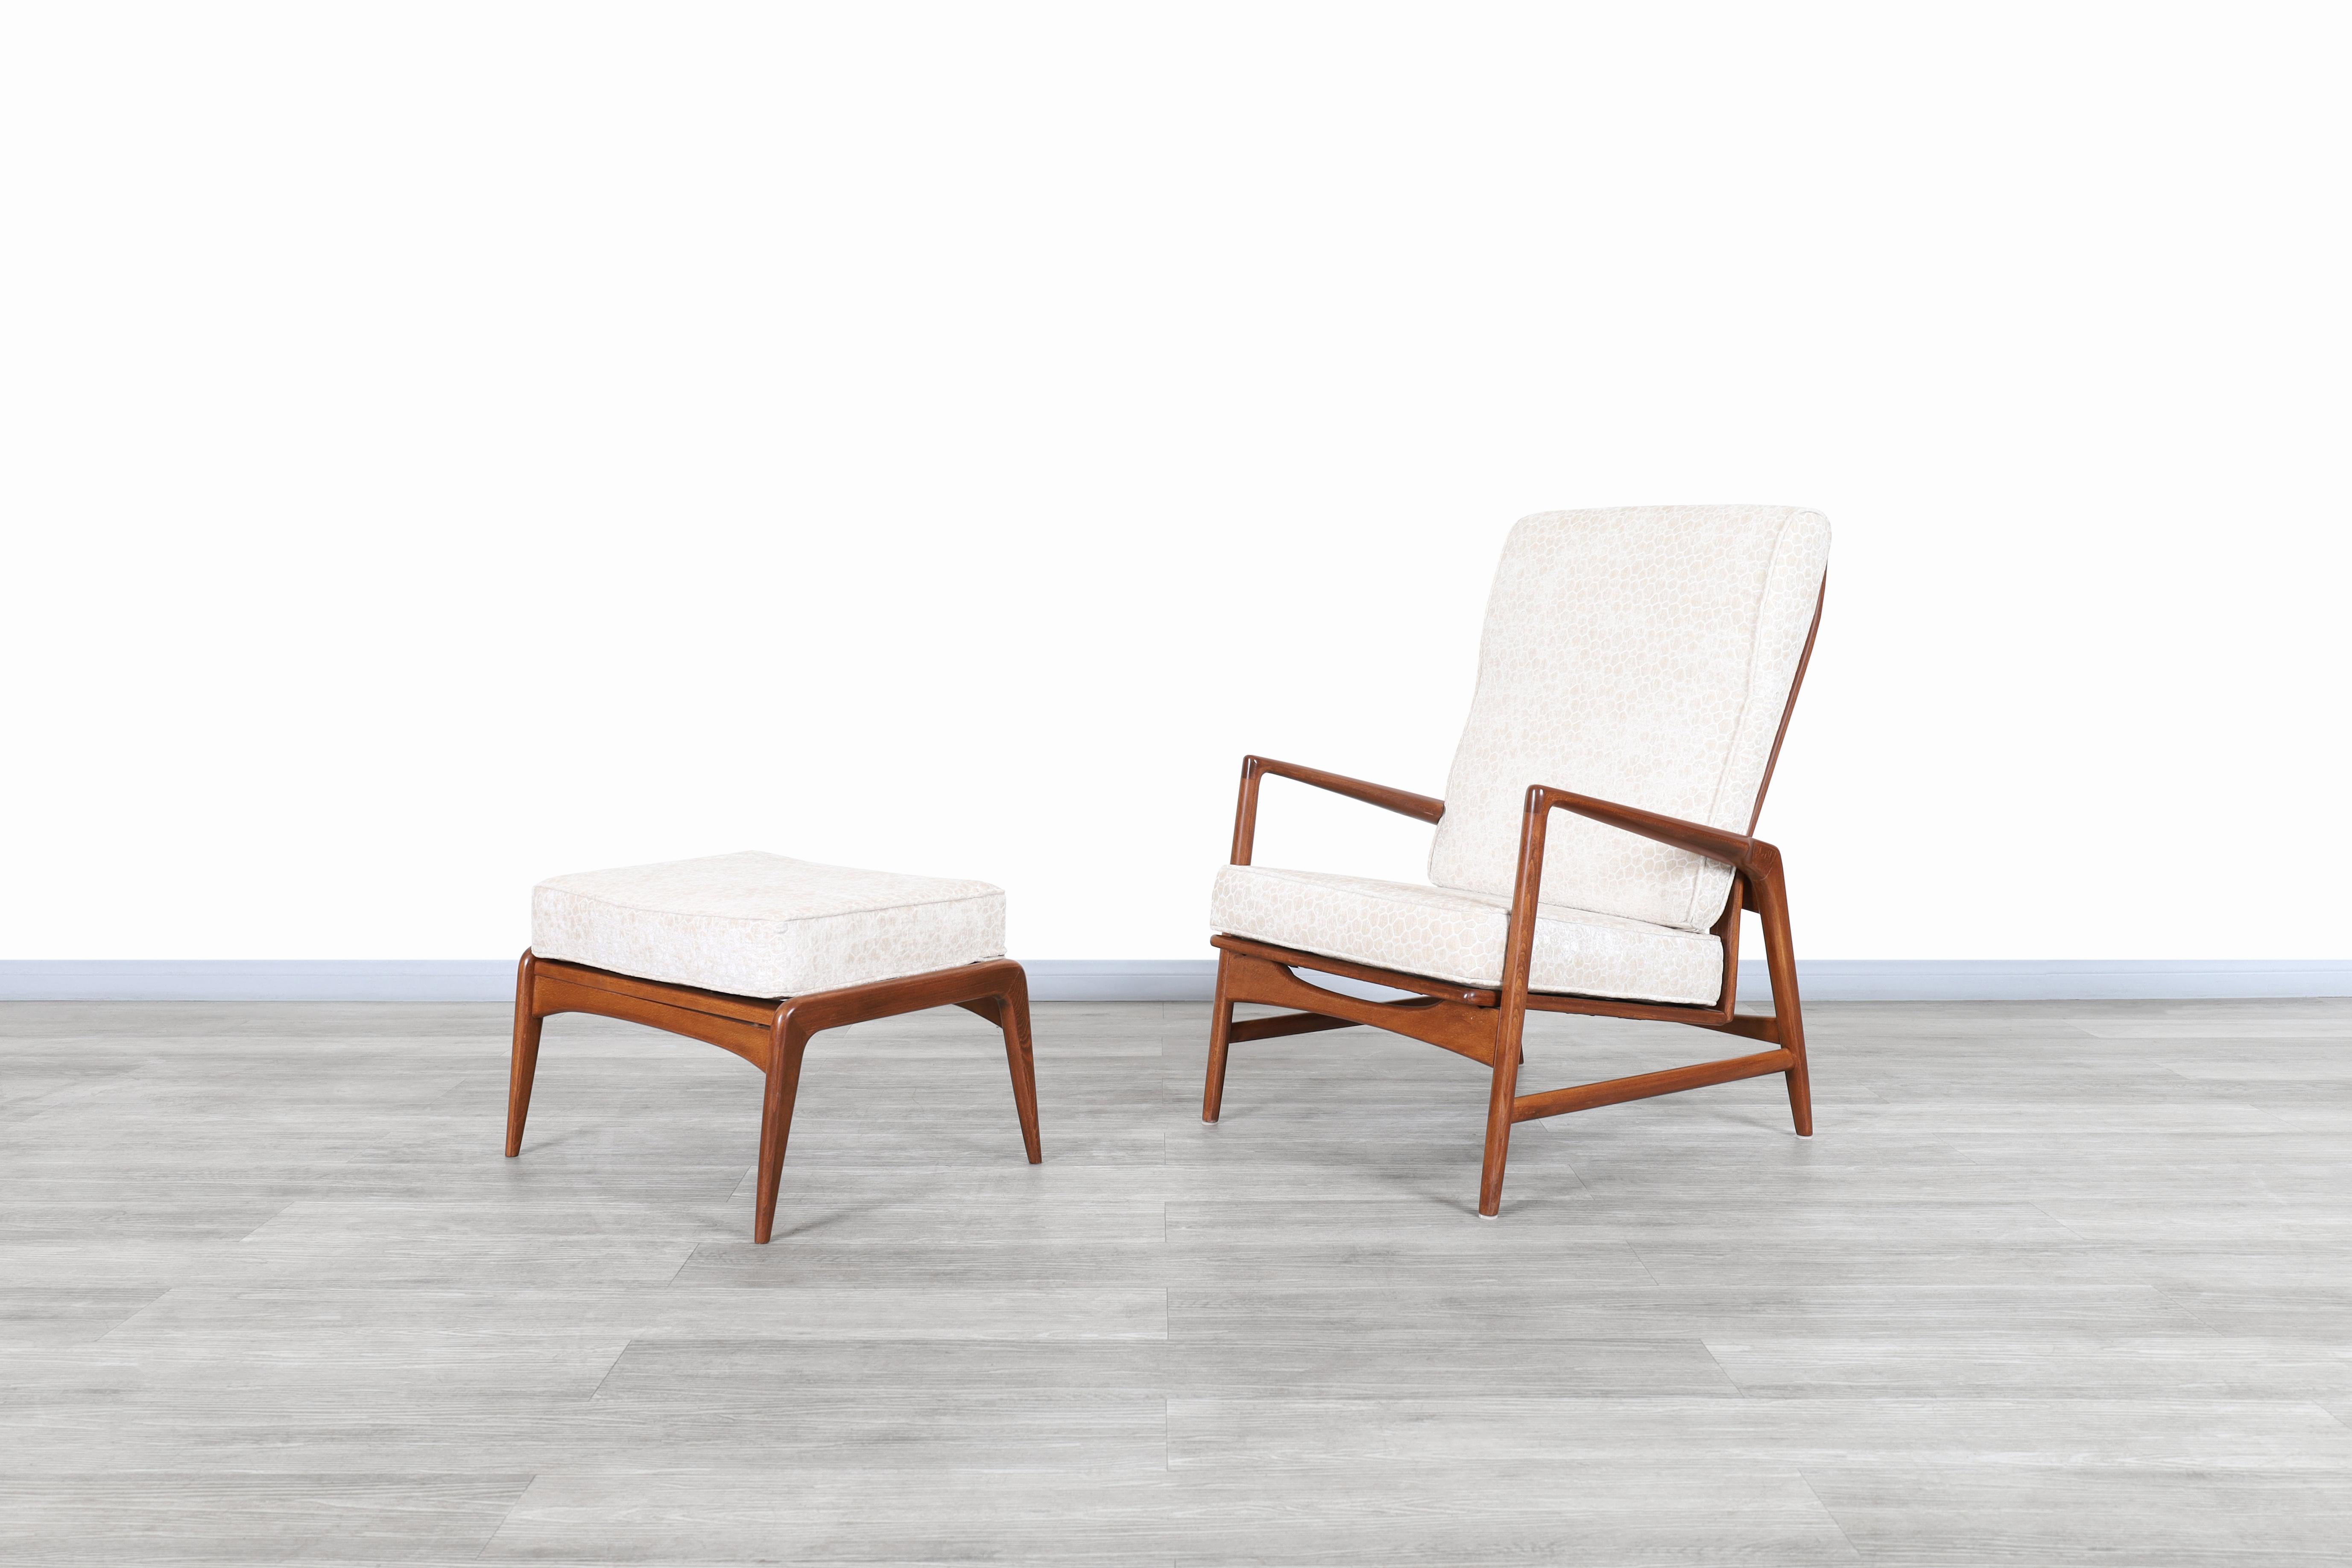 Amazing Danish walnut reclining lounge chairs and ottoman designed by Ib Kofod Larsen in Denmark, circa 1960s. Both the chair and the ottoman have a stained walnut frame that's been handcrafted. The chair has a mechanism that will allow you to